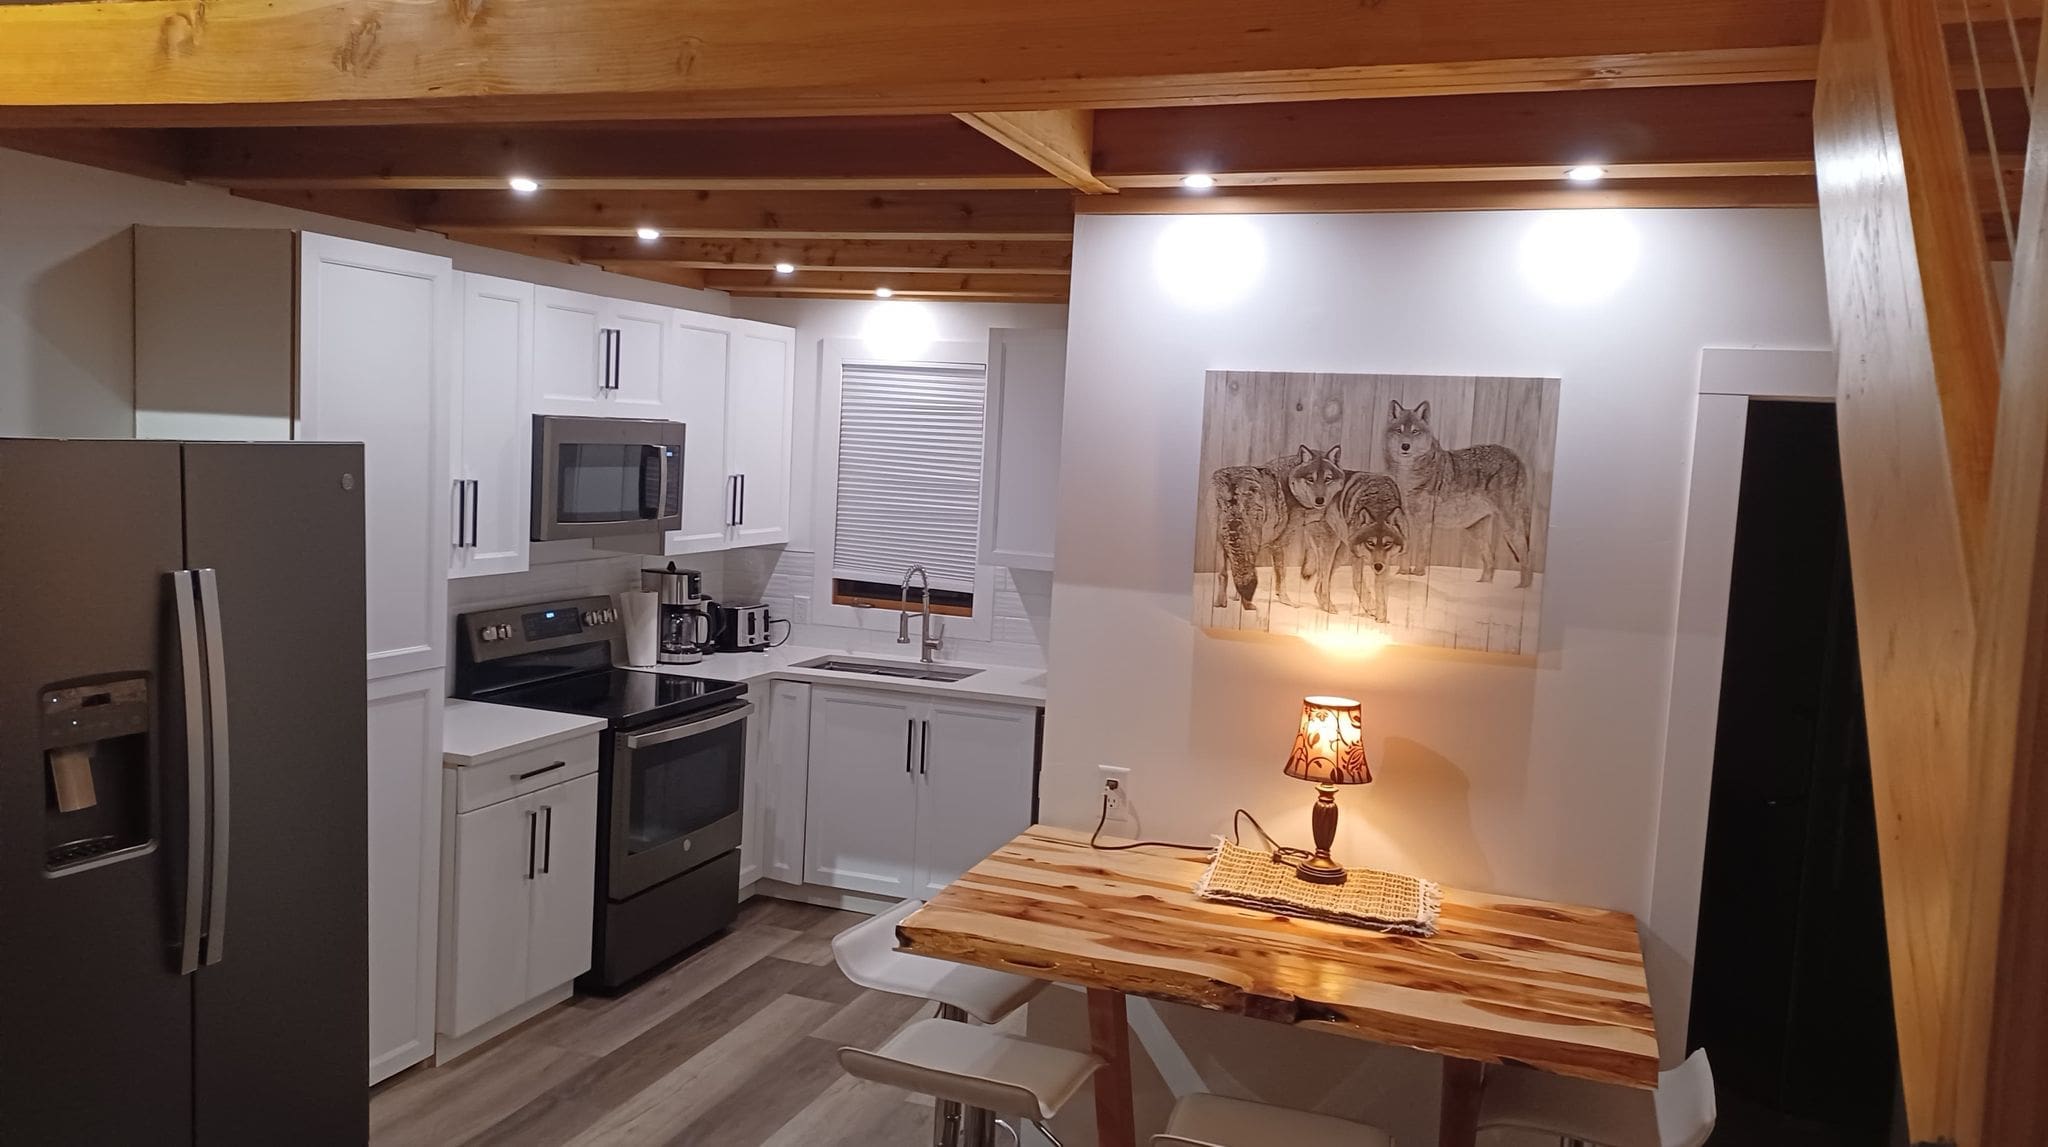 Cozy Cabin and Kitchen with high ceilings, bright lights, and loft bedroom above living space. Relax in the hot tub, sauna or enjoy the BBQ and front deck with the countryside around you.